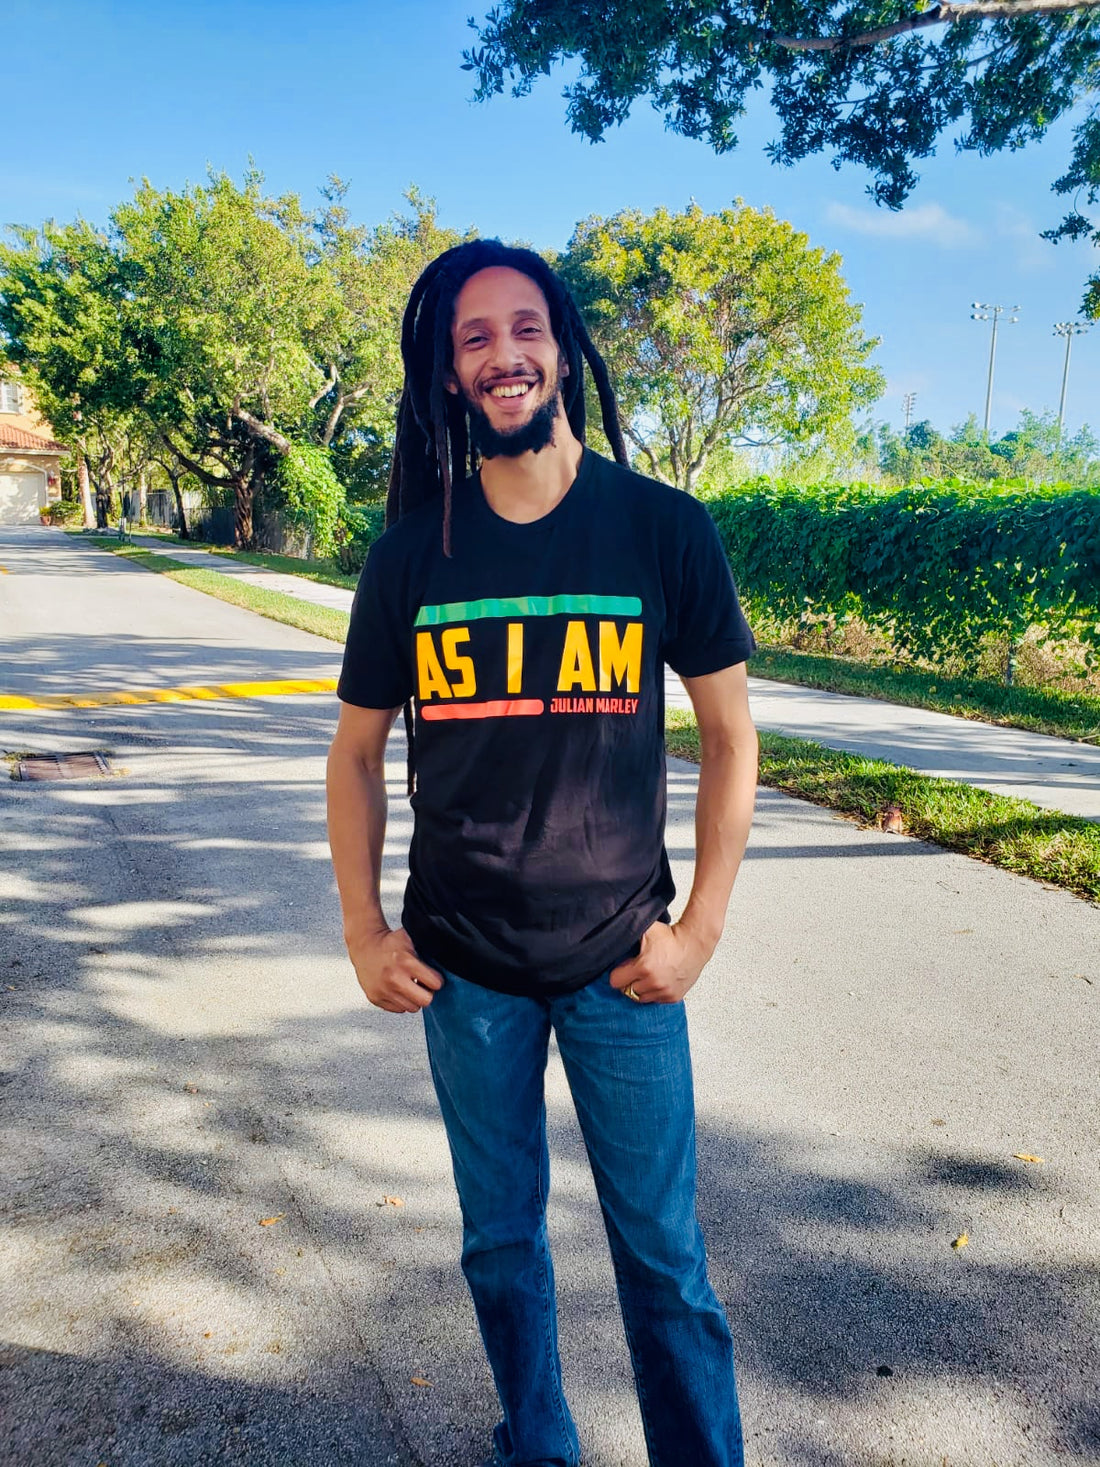 GRAMMY NOMINATED REGGAE STAR JULIAN MARLEY TRODS ON HIS “AS I AM” JOURNEY